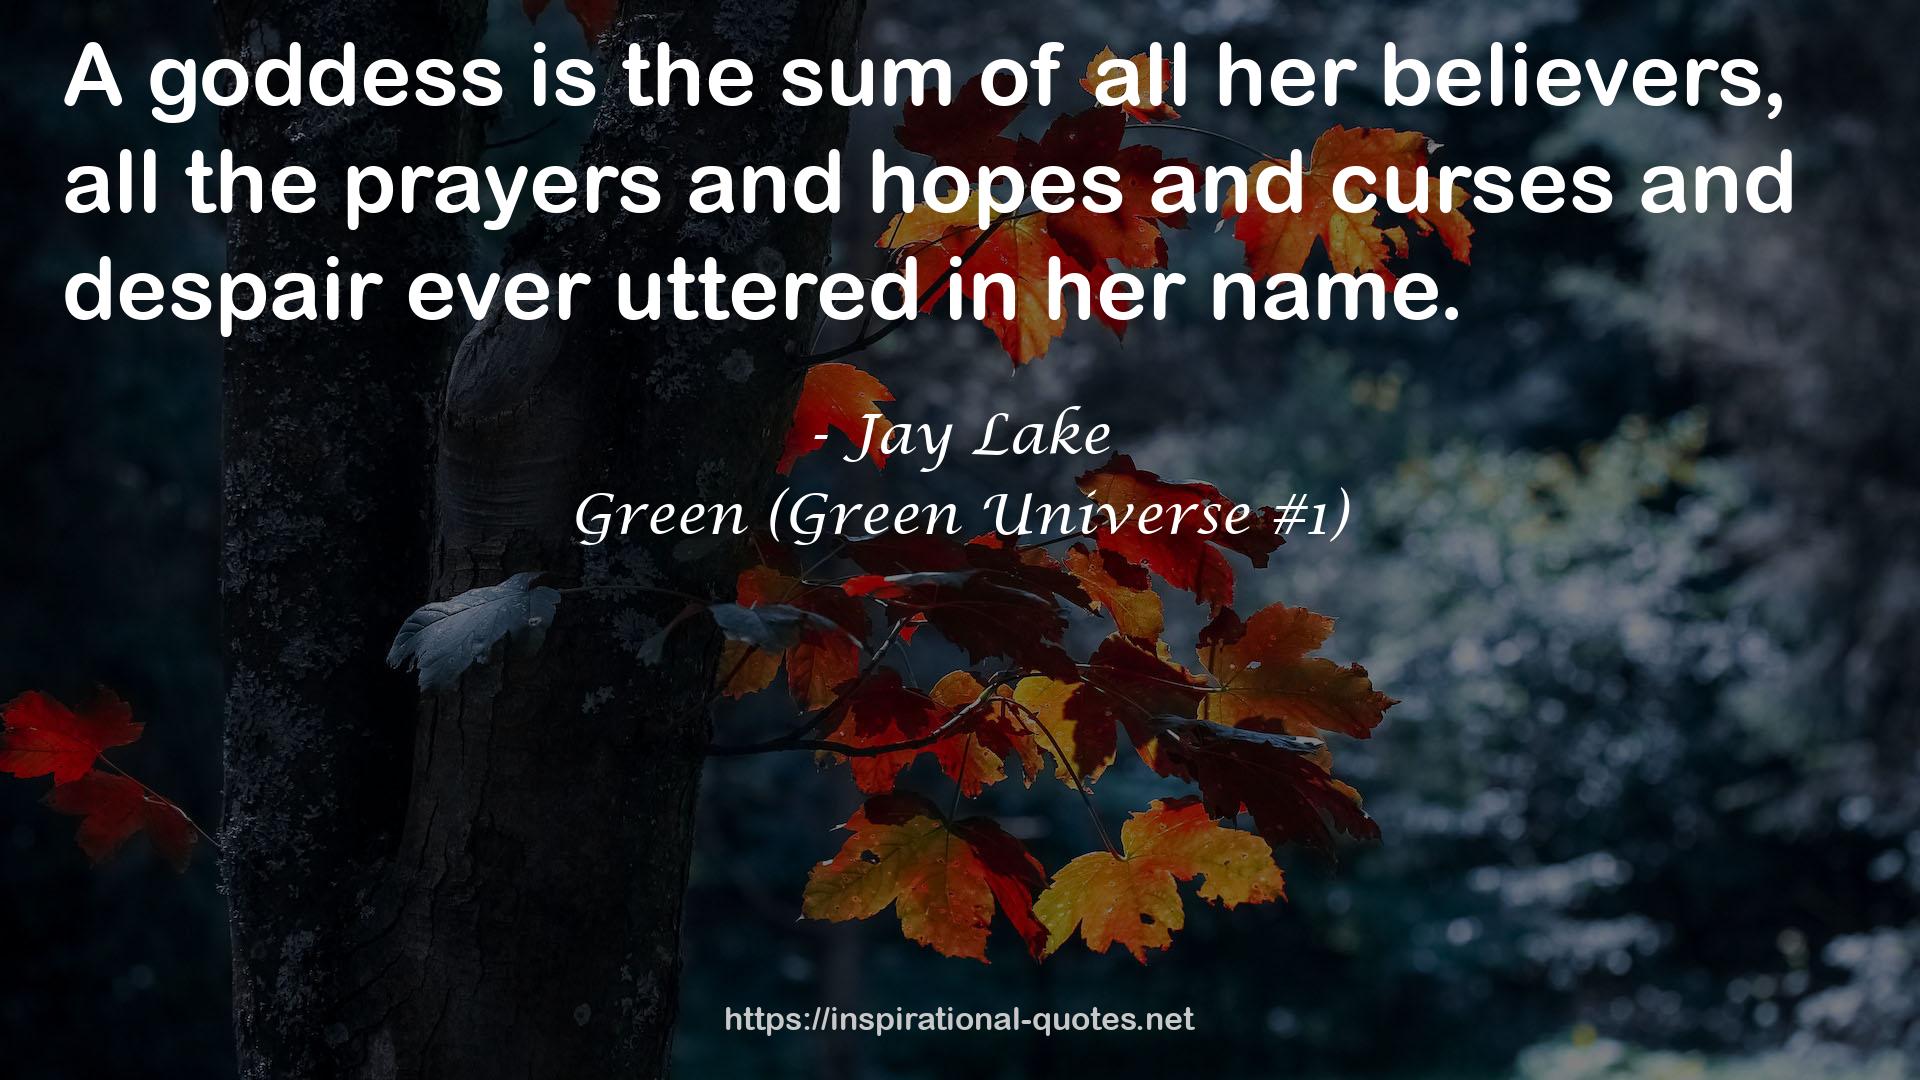 Green (Green Universe #1) QUOTES